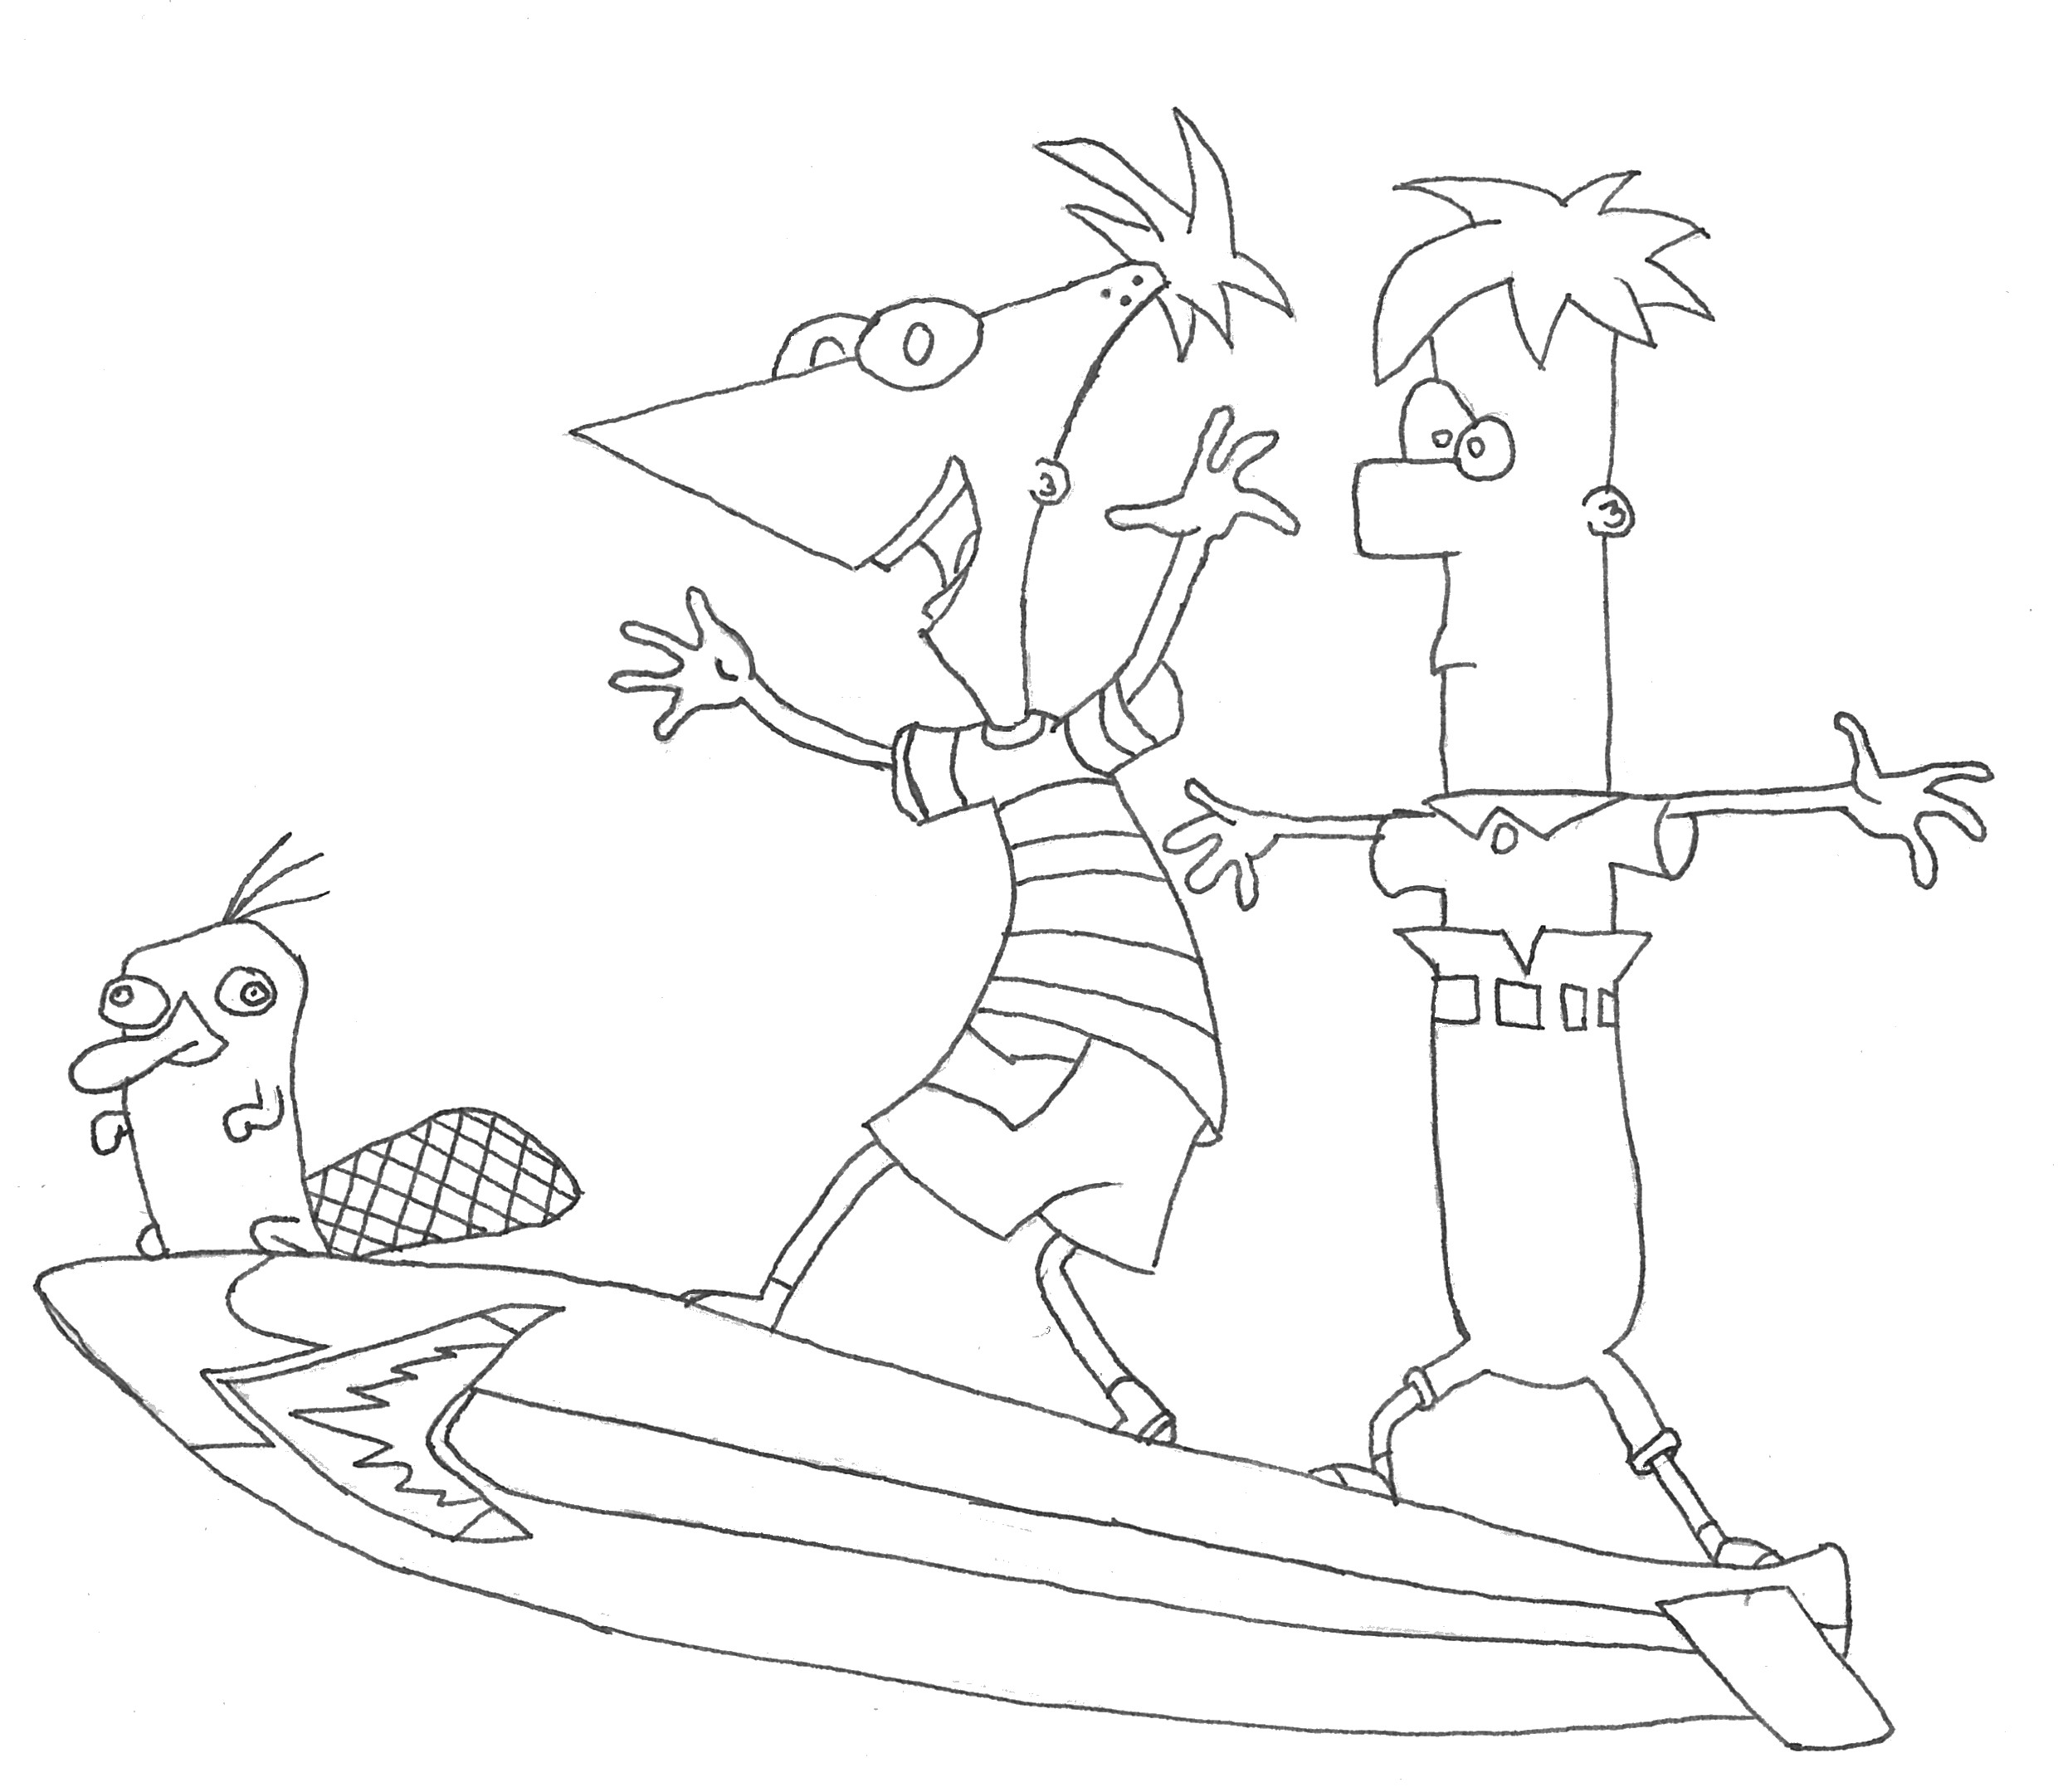 phineas-and-ferb-color-pages-phineas-and-ferb-cartoon-coloring-pages